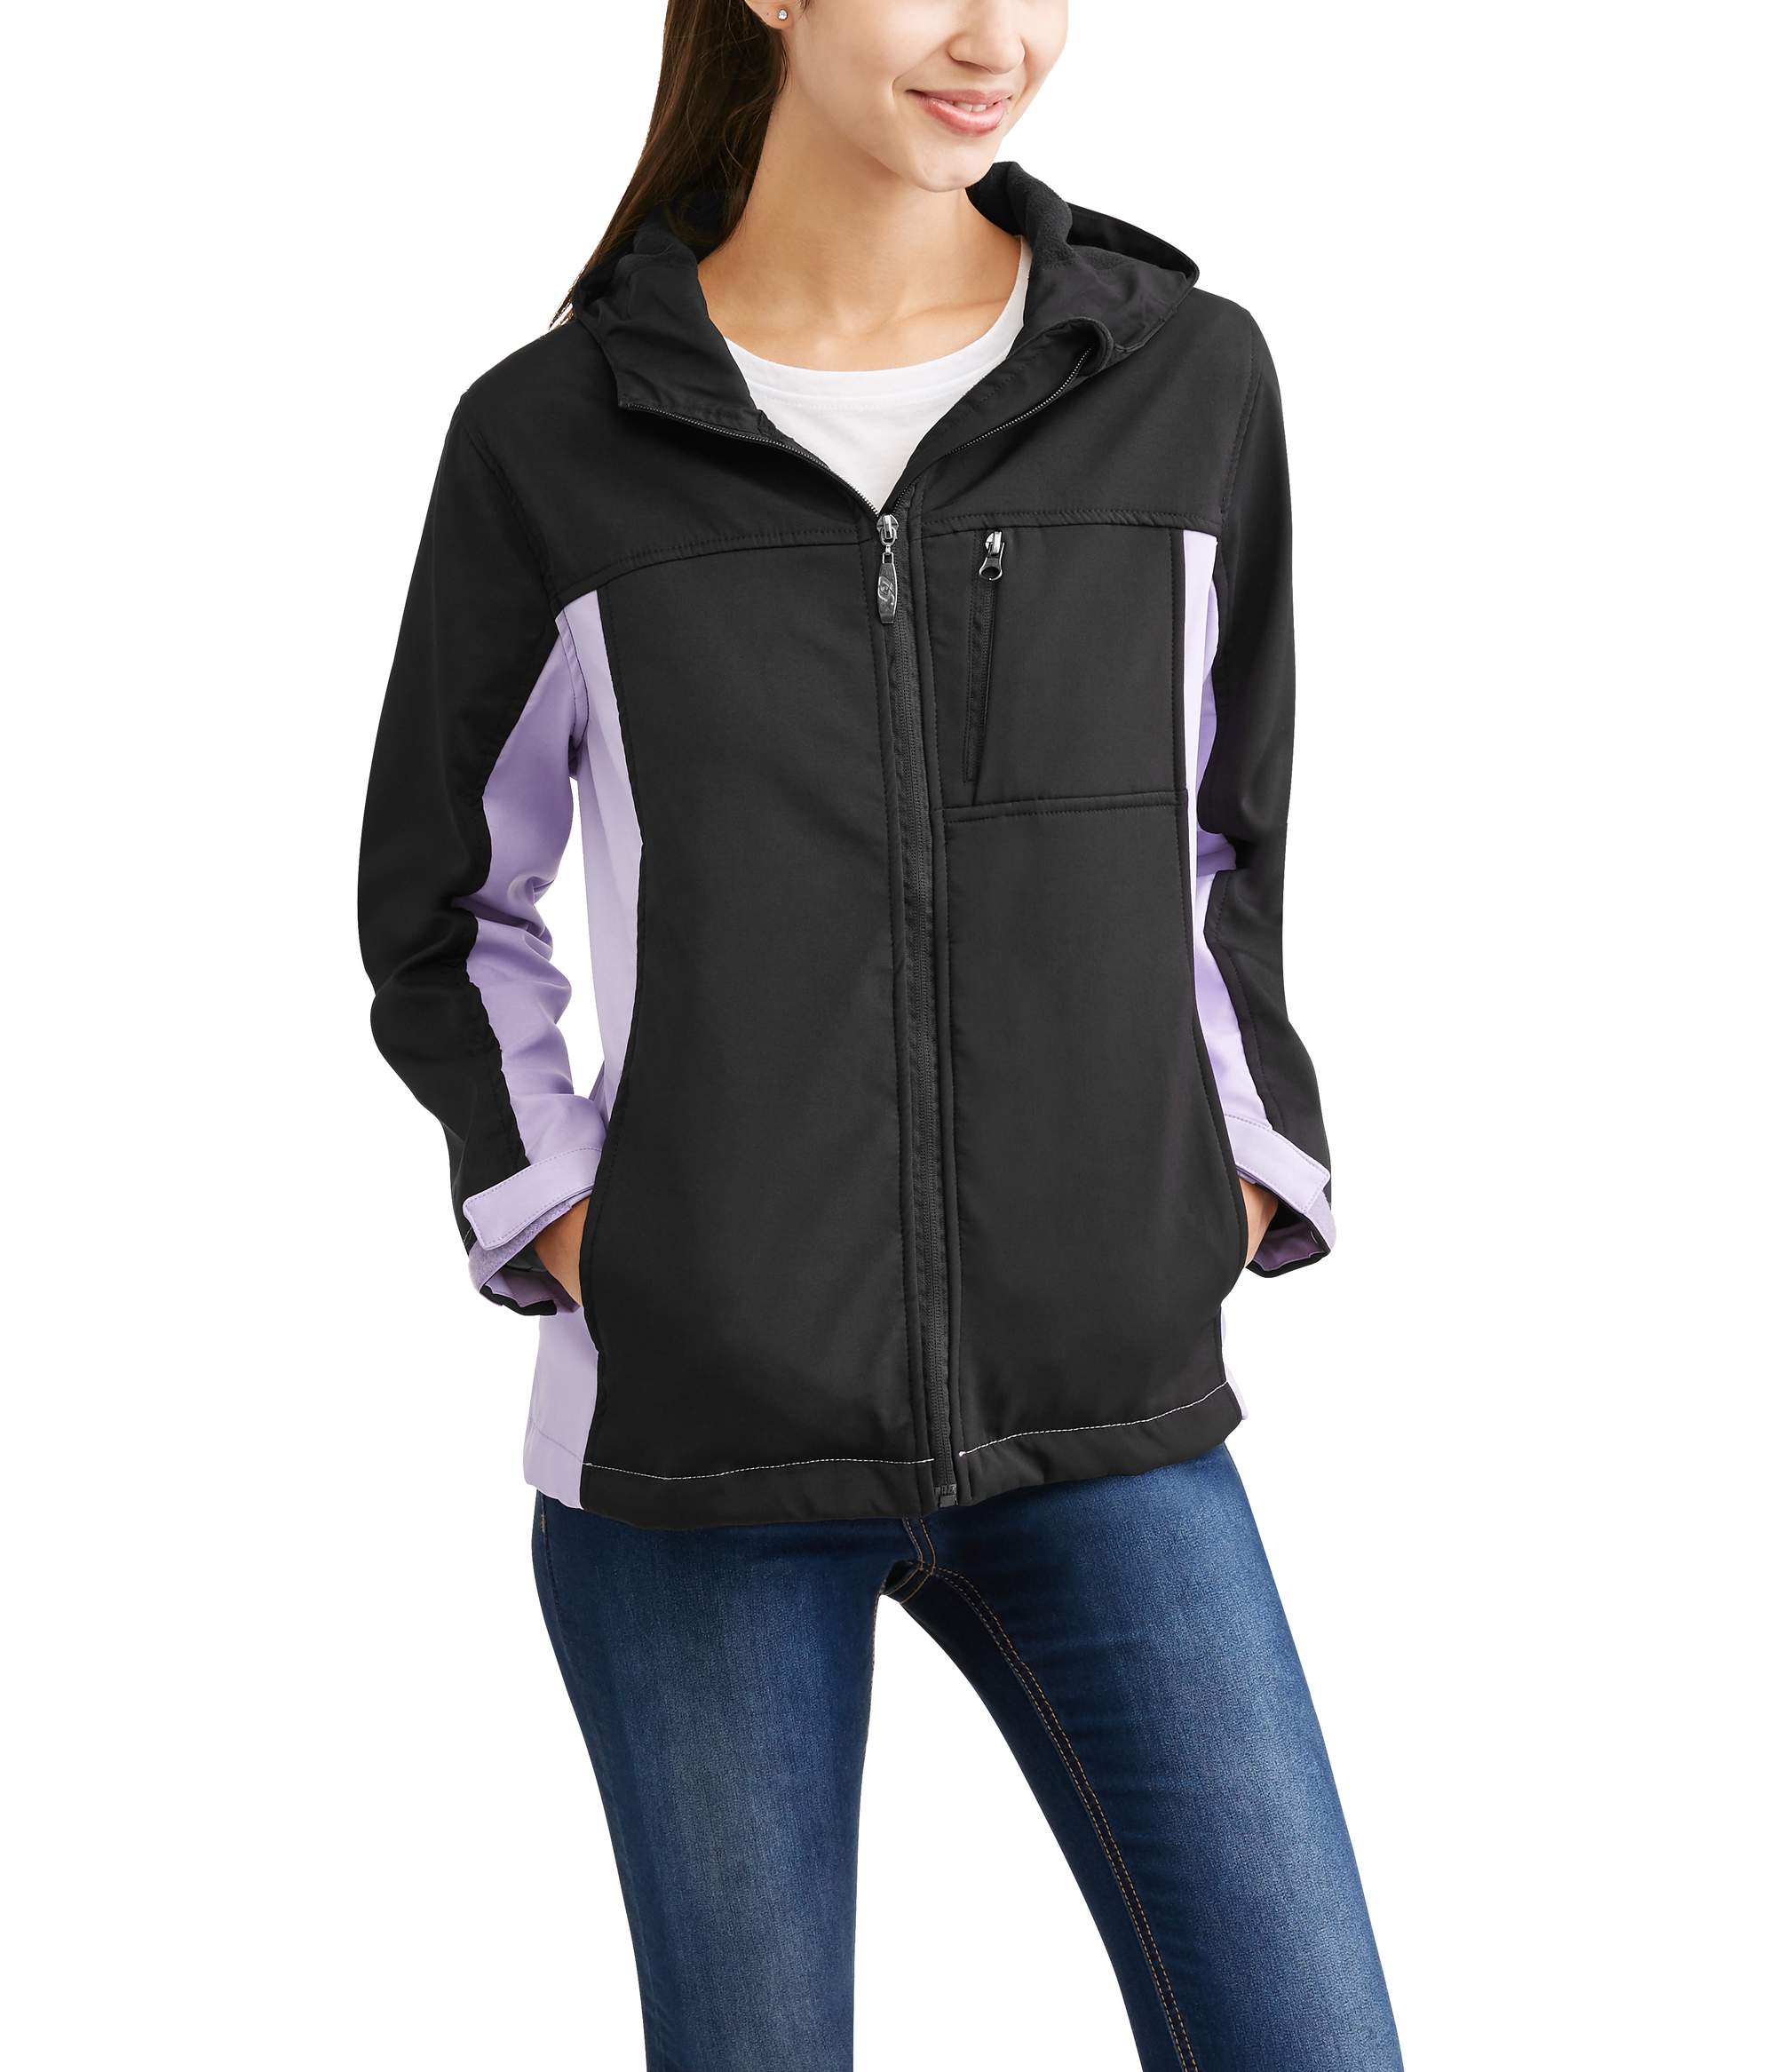 Climate Concepts Women's Colorblock Soft - image 1 of 2